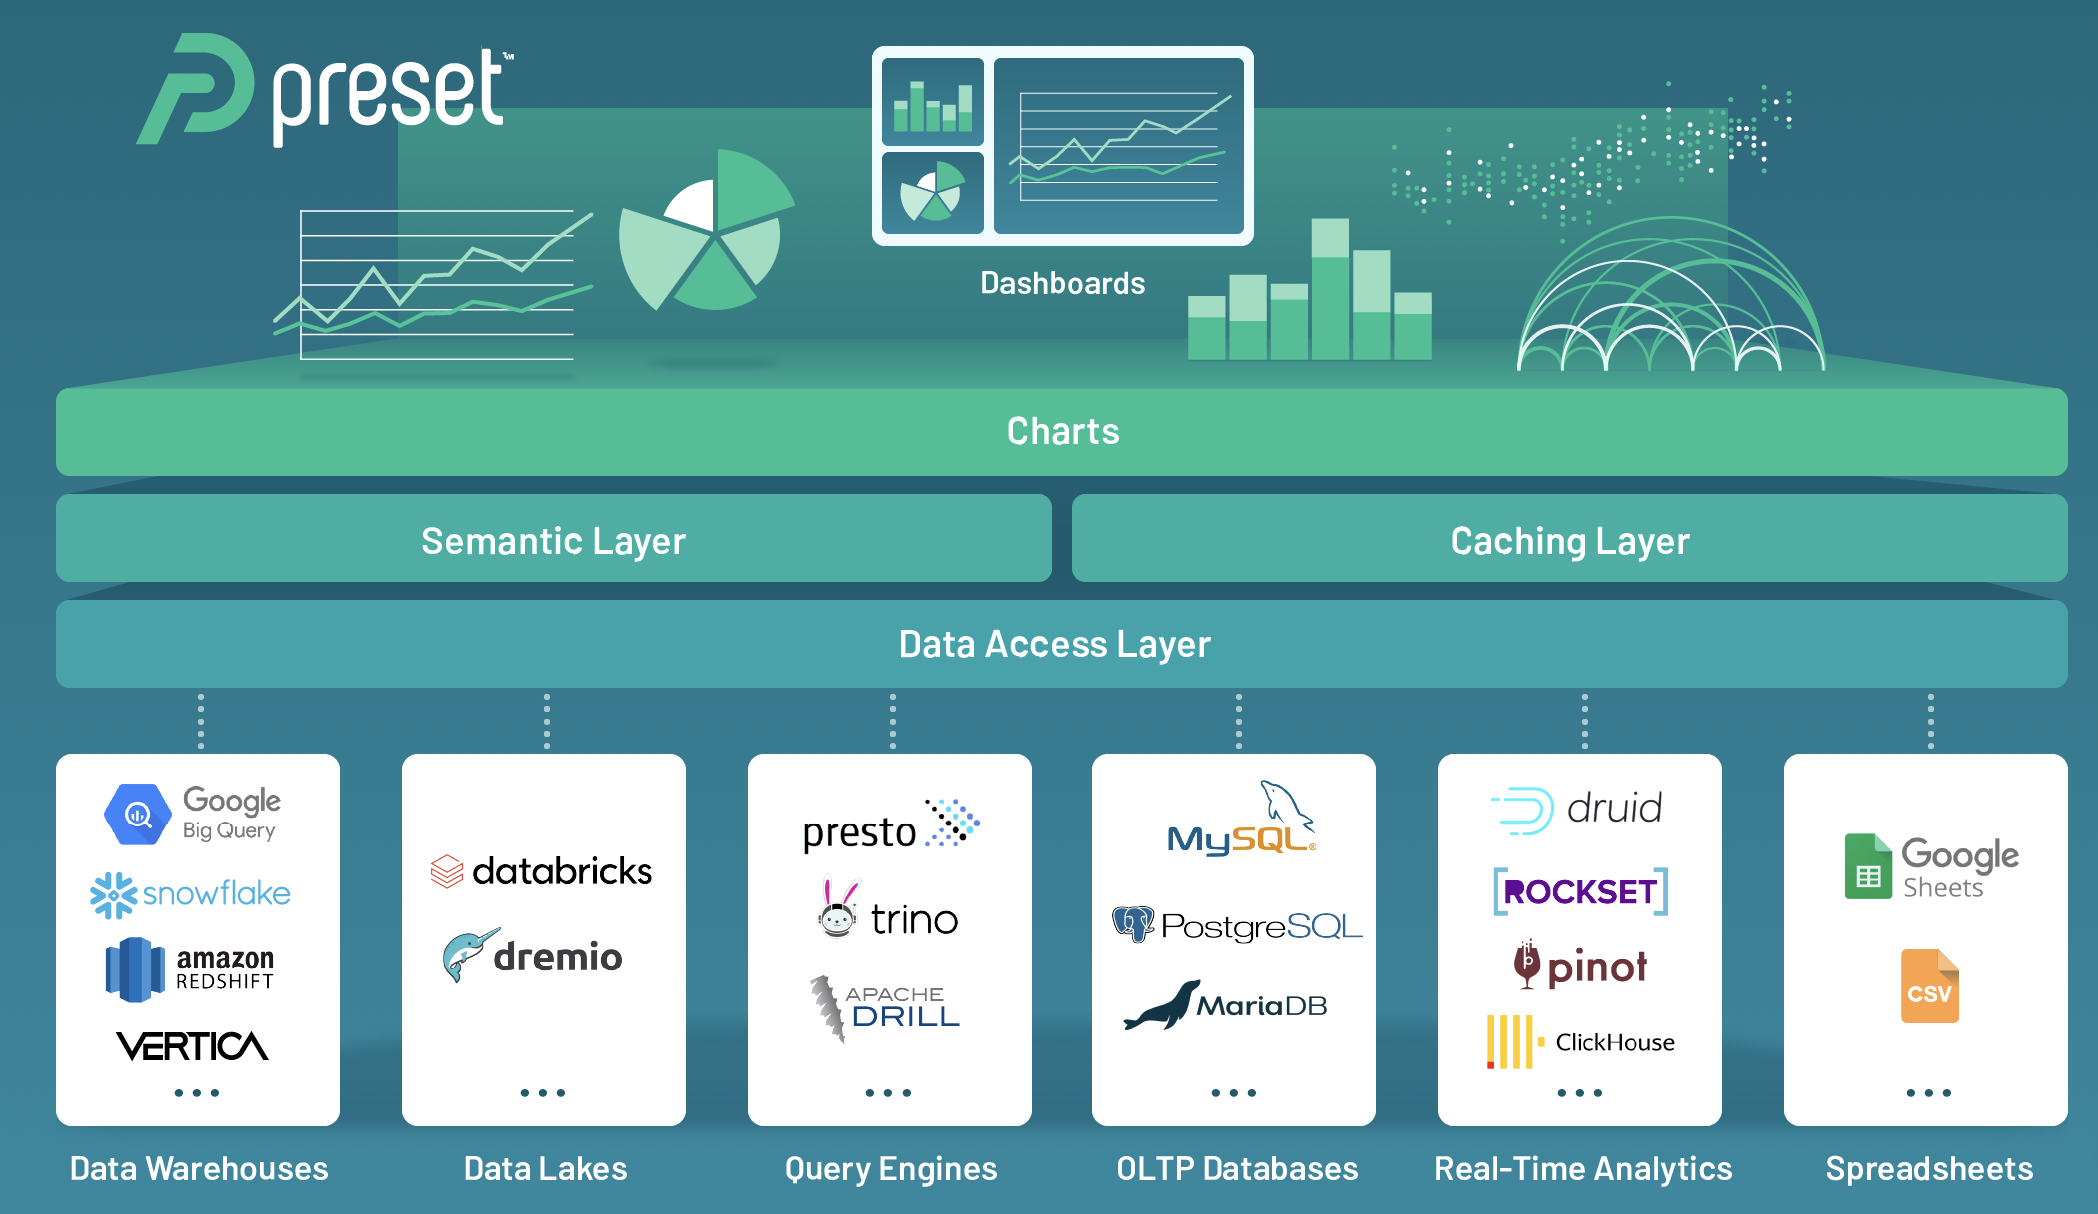 Leverage the investments you have made in your data infrastructure with a lightweight and powerful visualization layer on top. Preset is agnostic to your underlying data architecture and doesn't require an additional ingestion layer